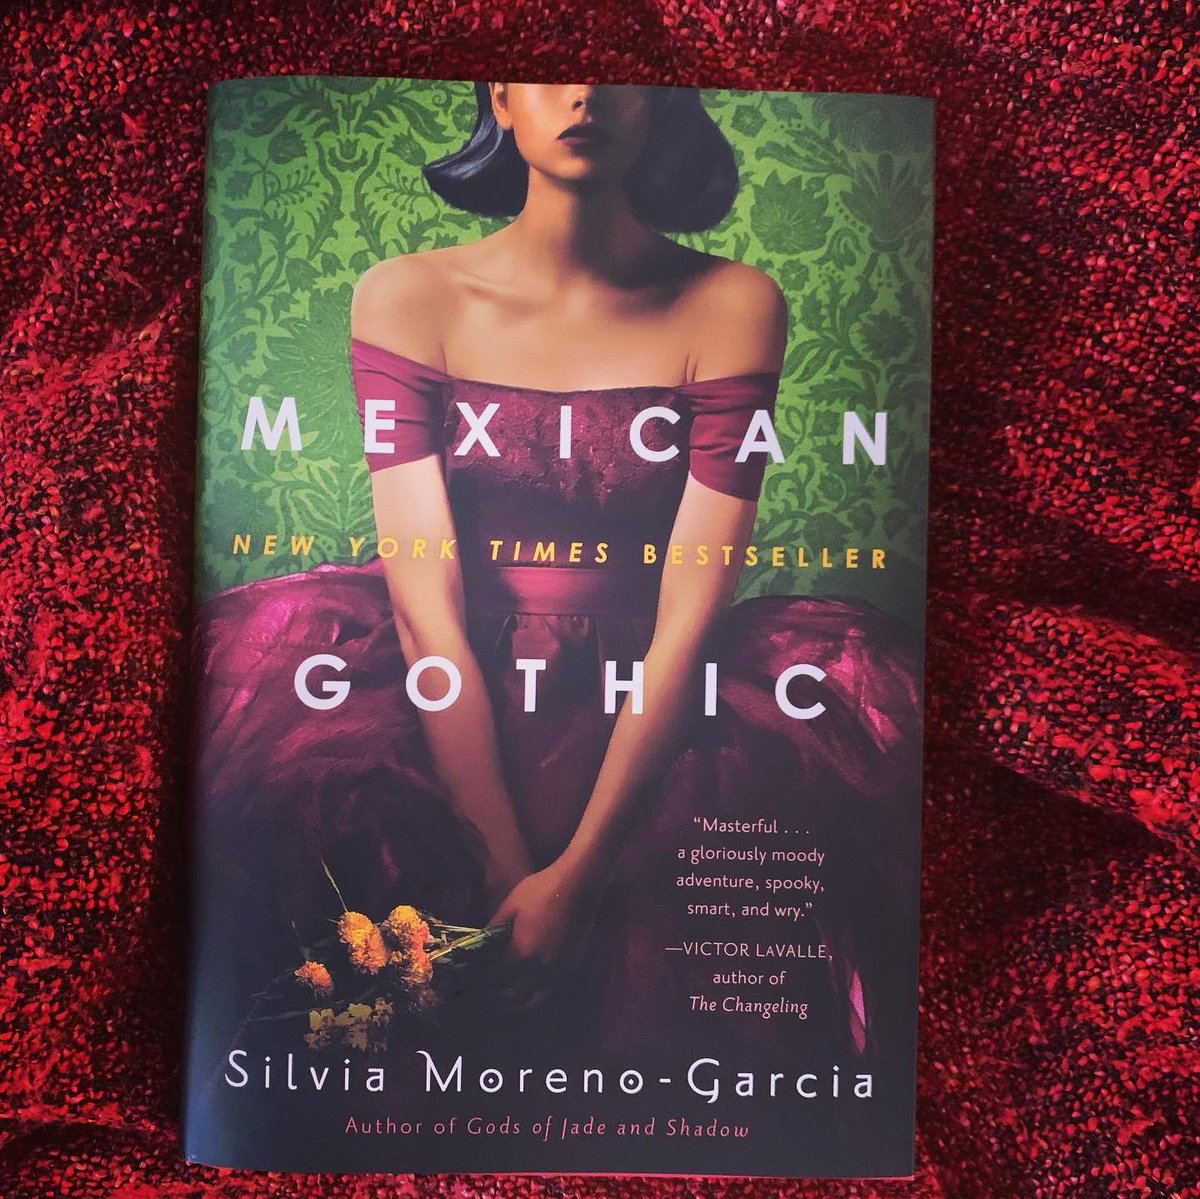 I couldn’t resist and got my hands on a copy of this beauty! Can’t wait to dive in #mexicangothic #silviamorenogarcia